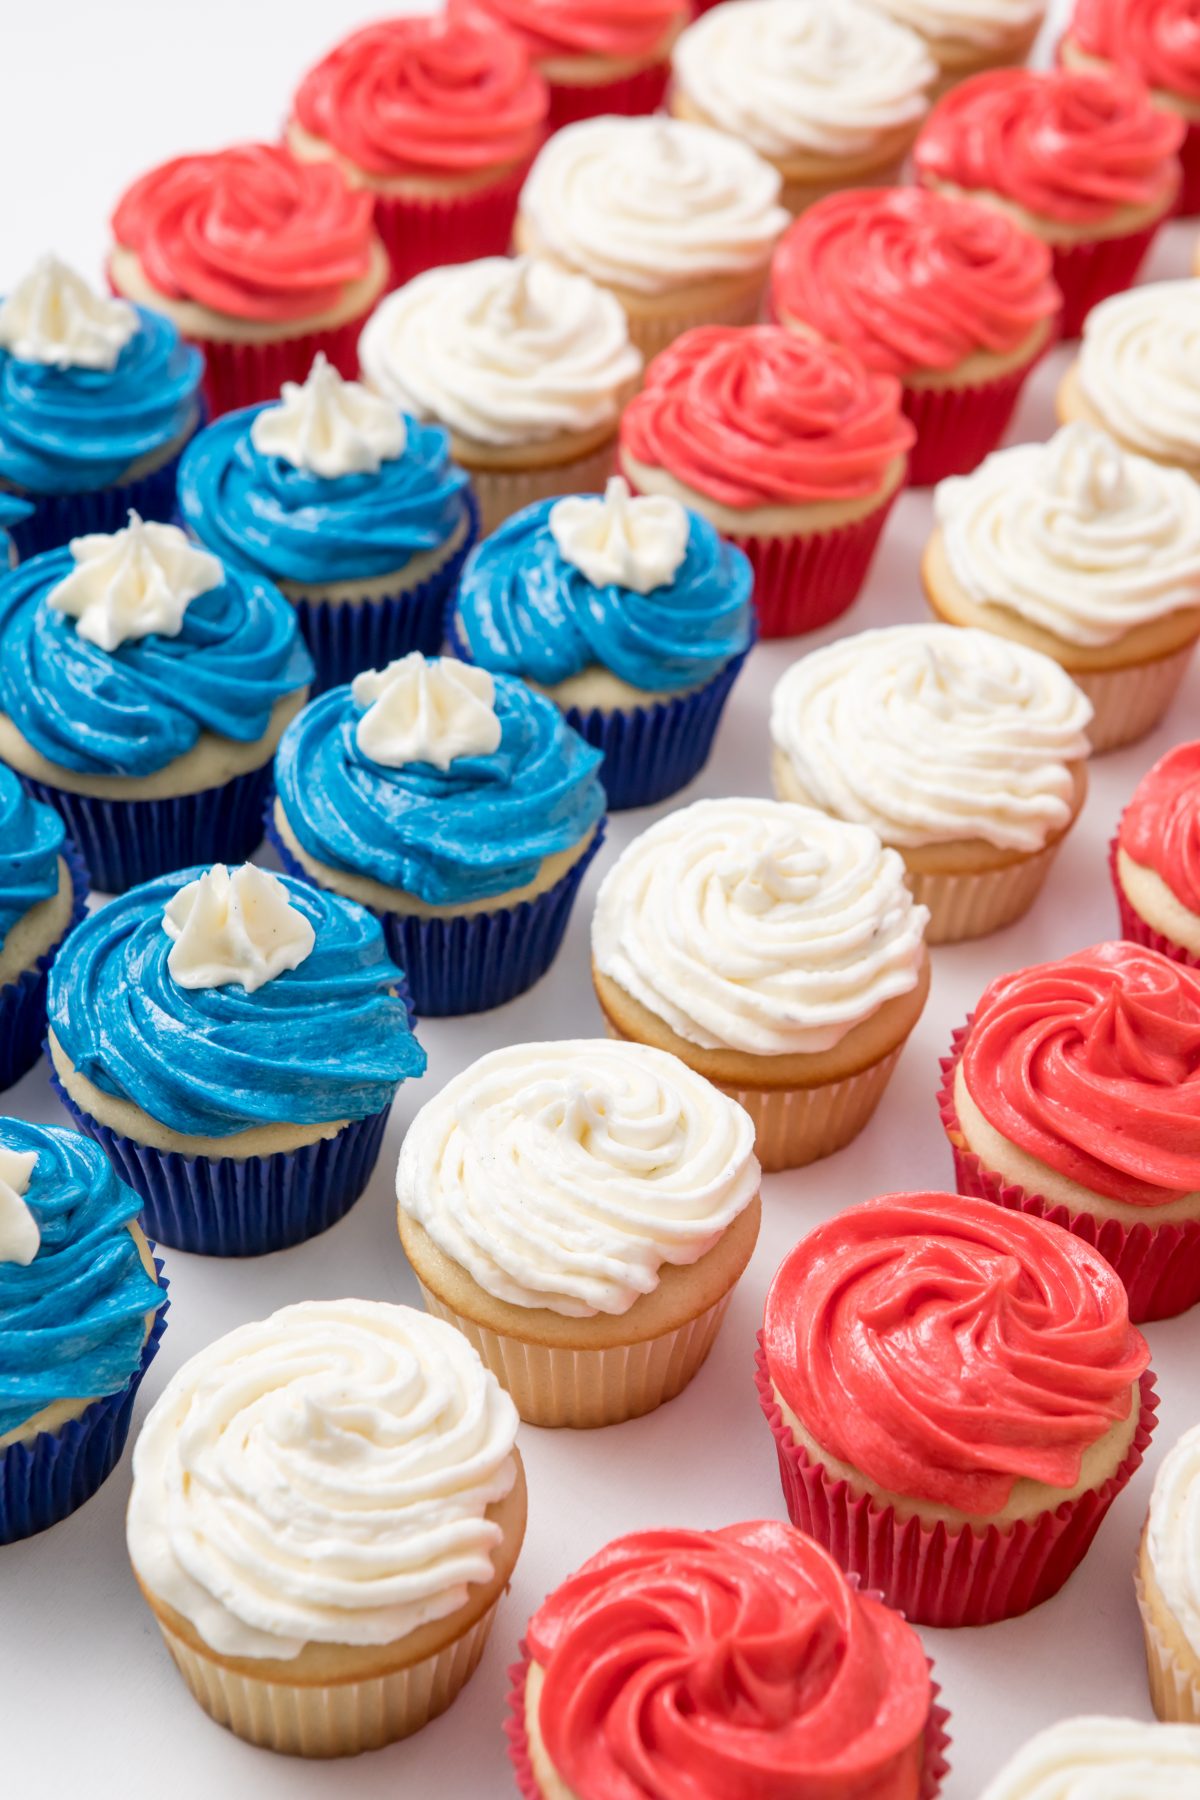 American flag cupcakes make a spectacular party display